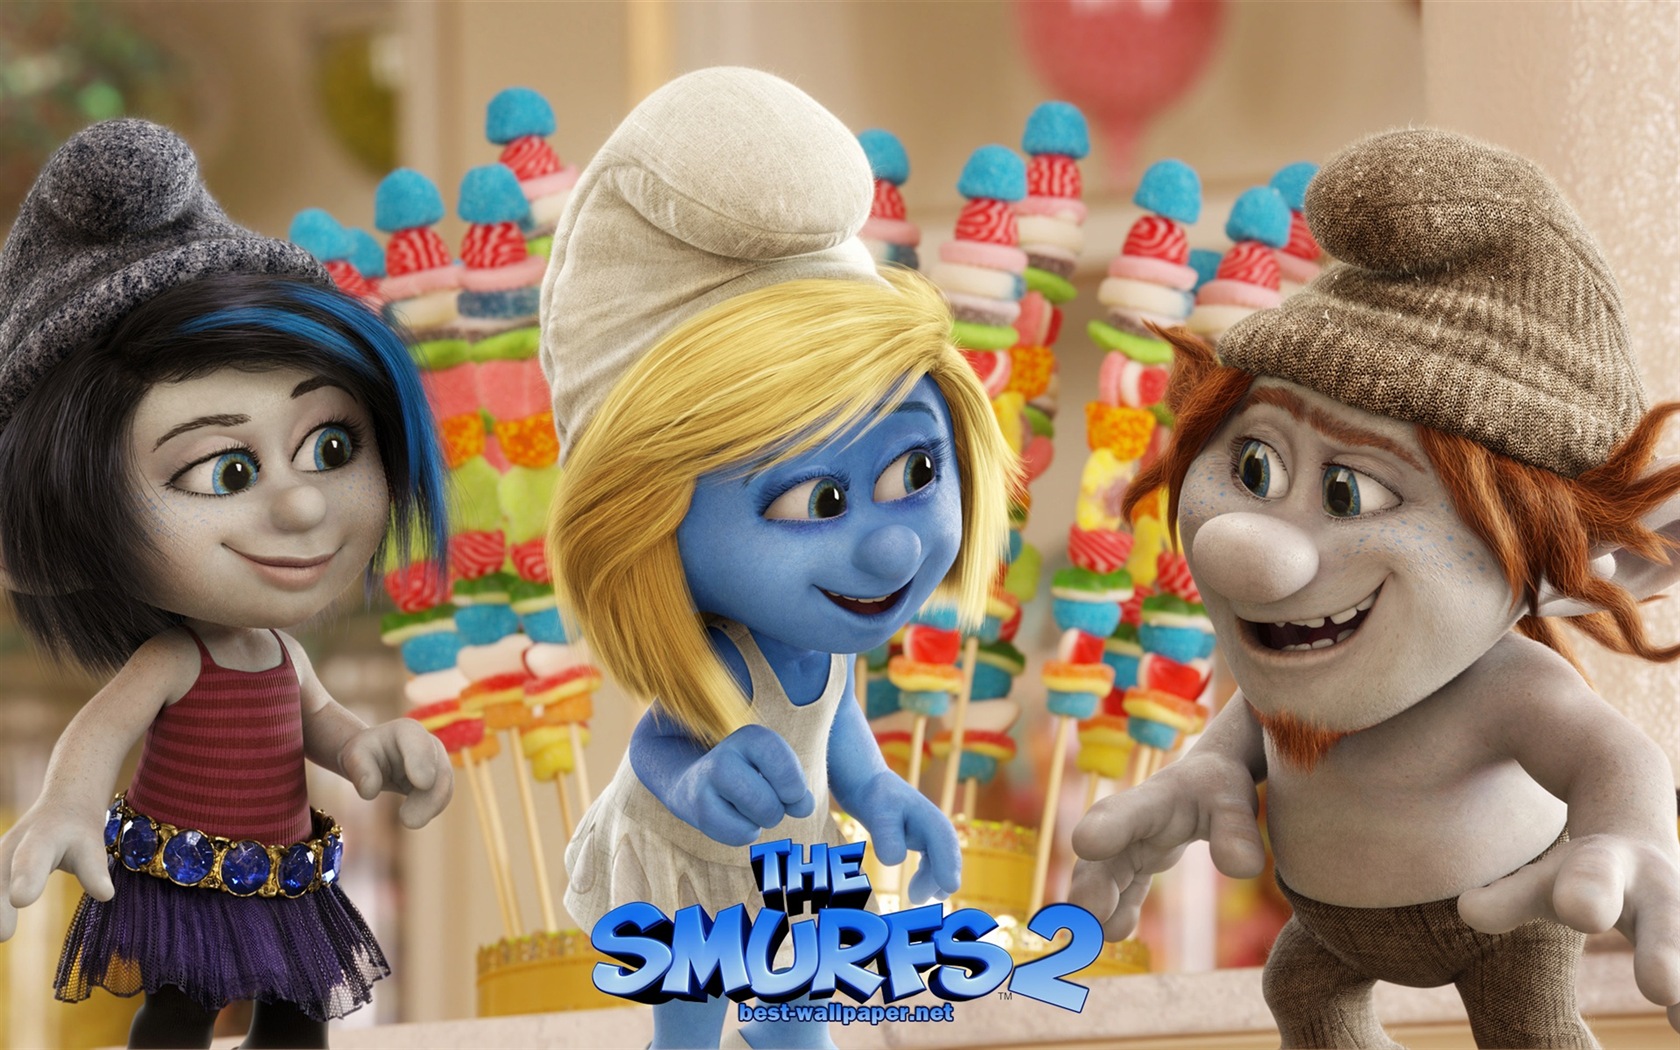 The Smurfs 2 HD movie wallpapers #5 - 1680x1050